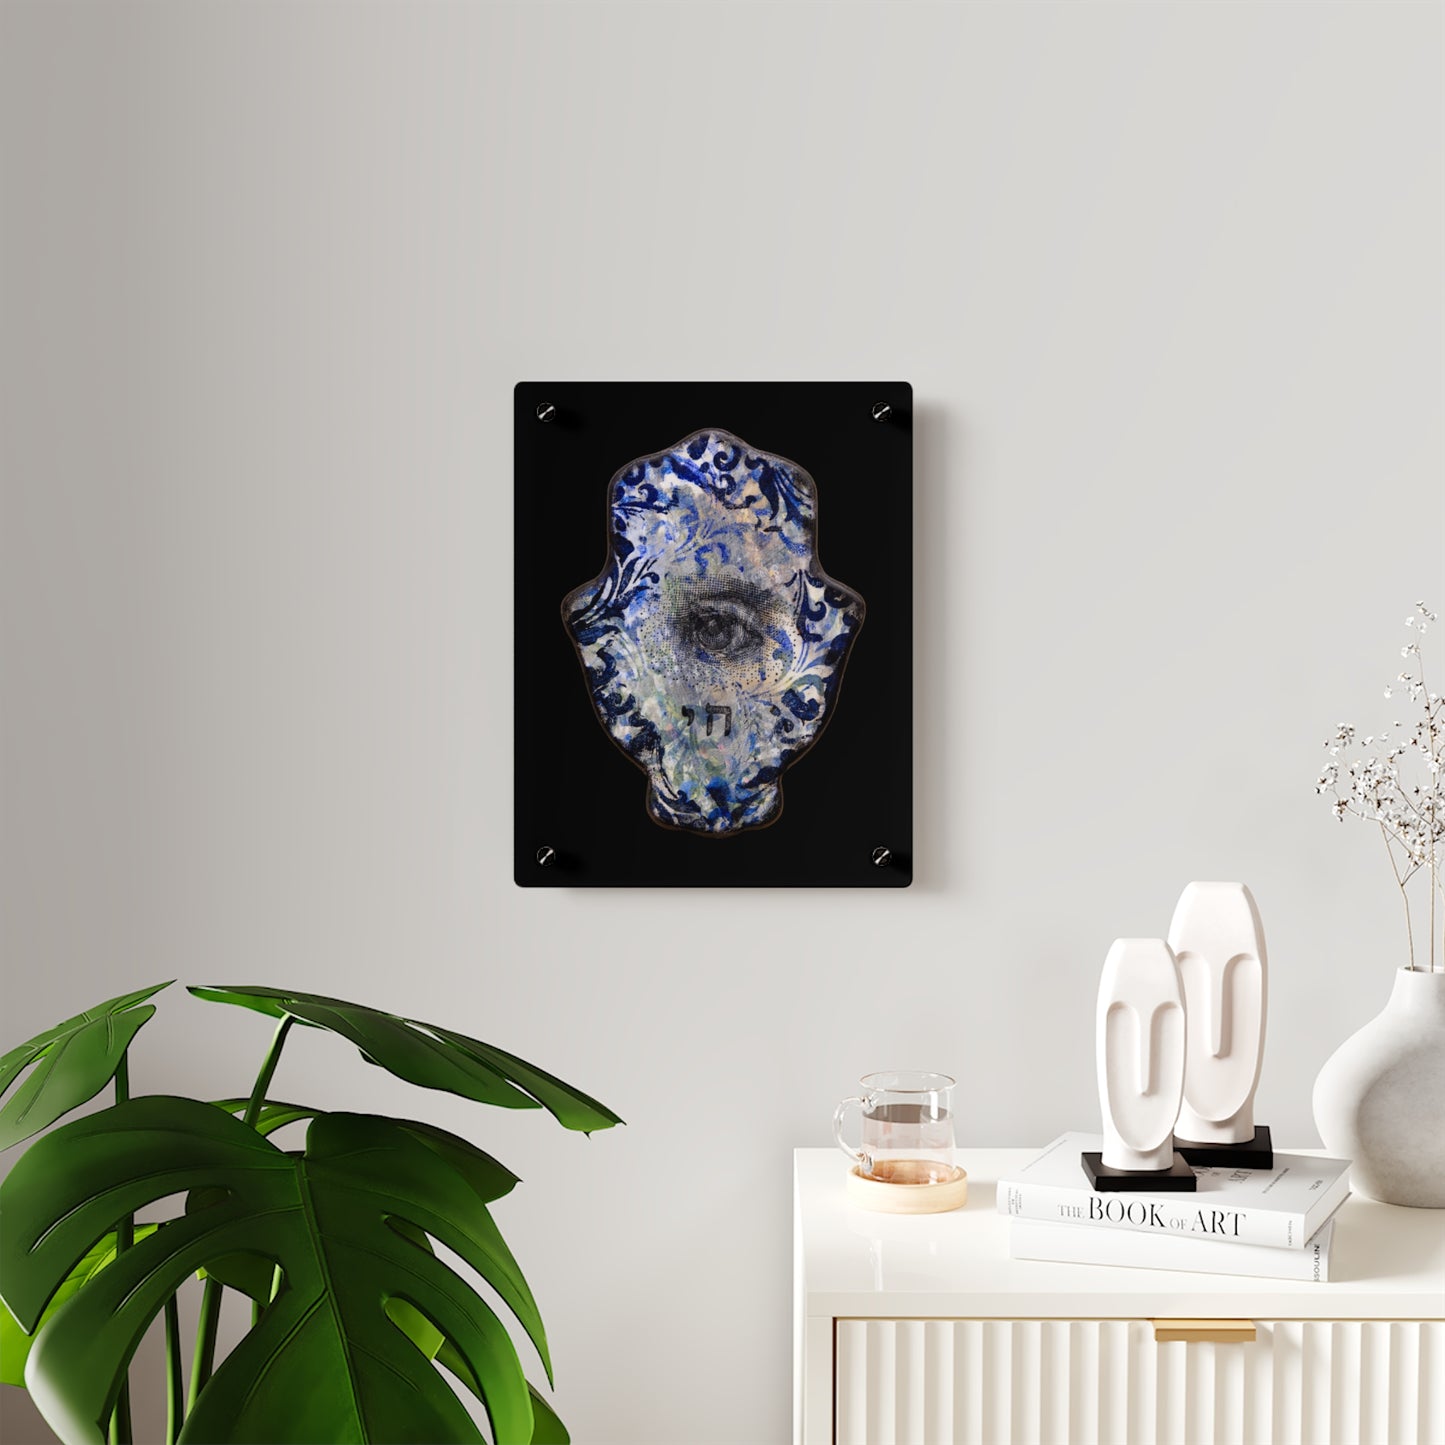 "Hamsa in Distressed Blues" by Esther Cohen Glossy Modern Acrylic Print